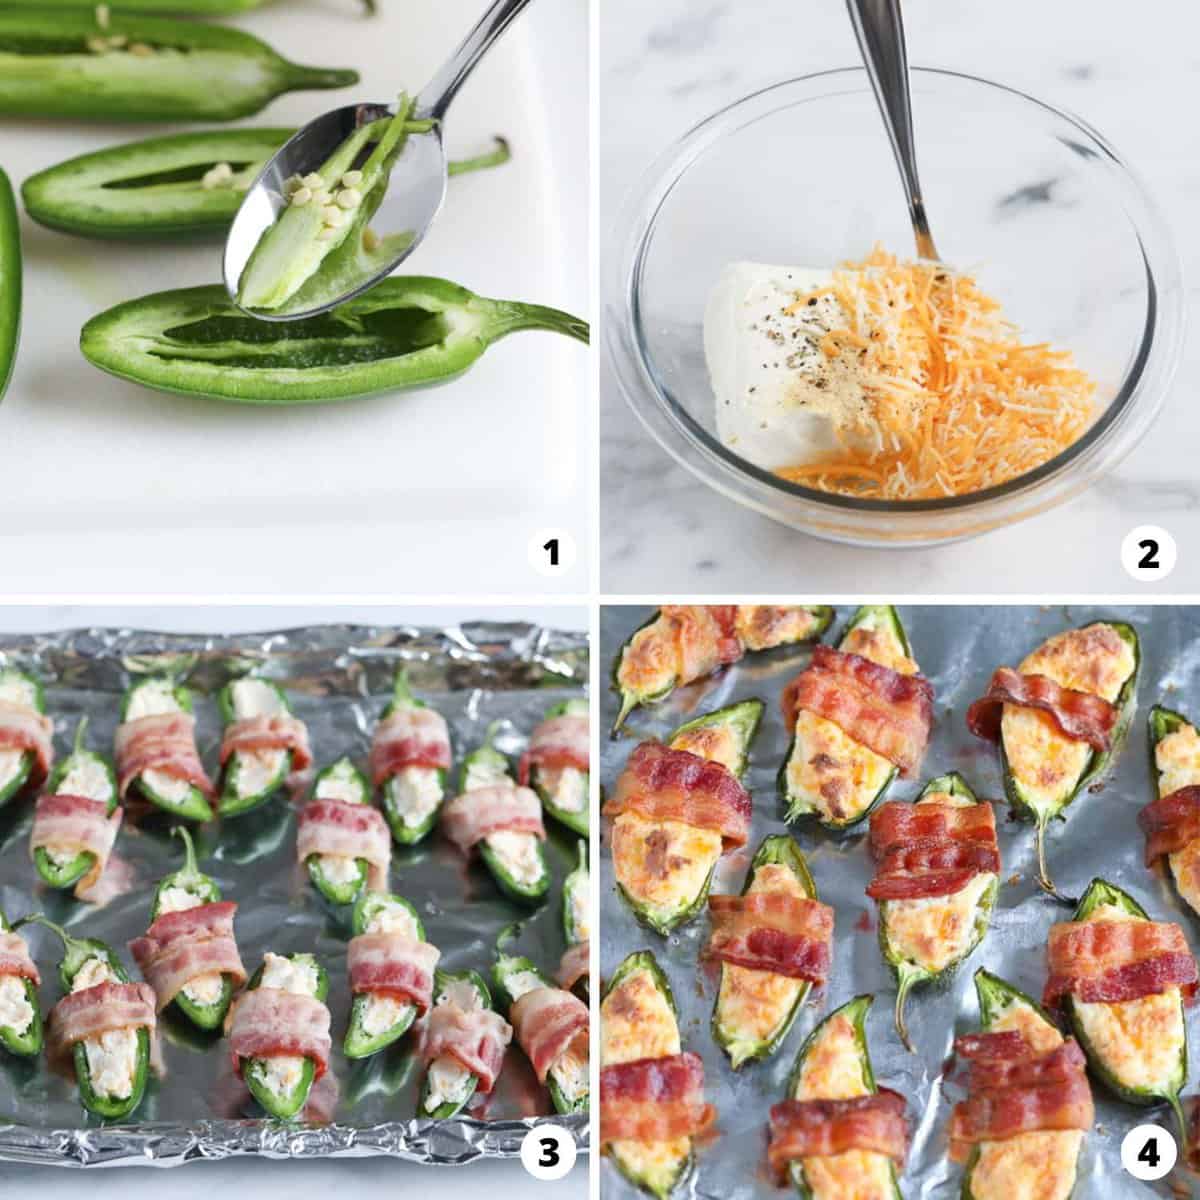 The process of making jalapeno poppers in a four step collage. 